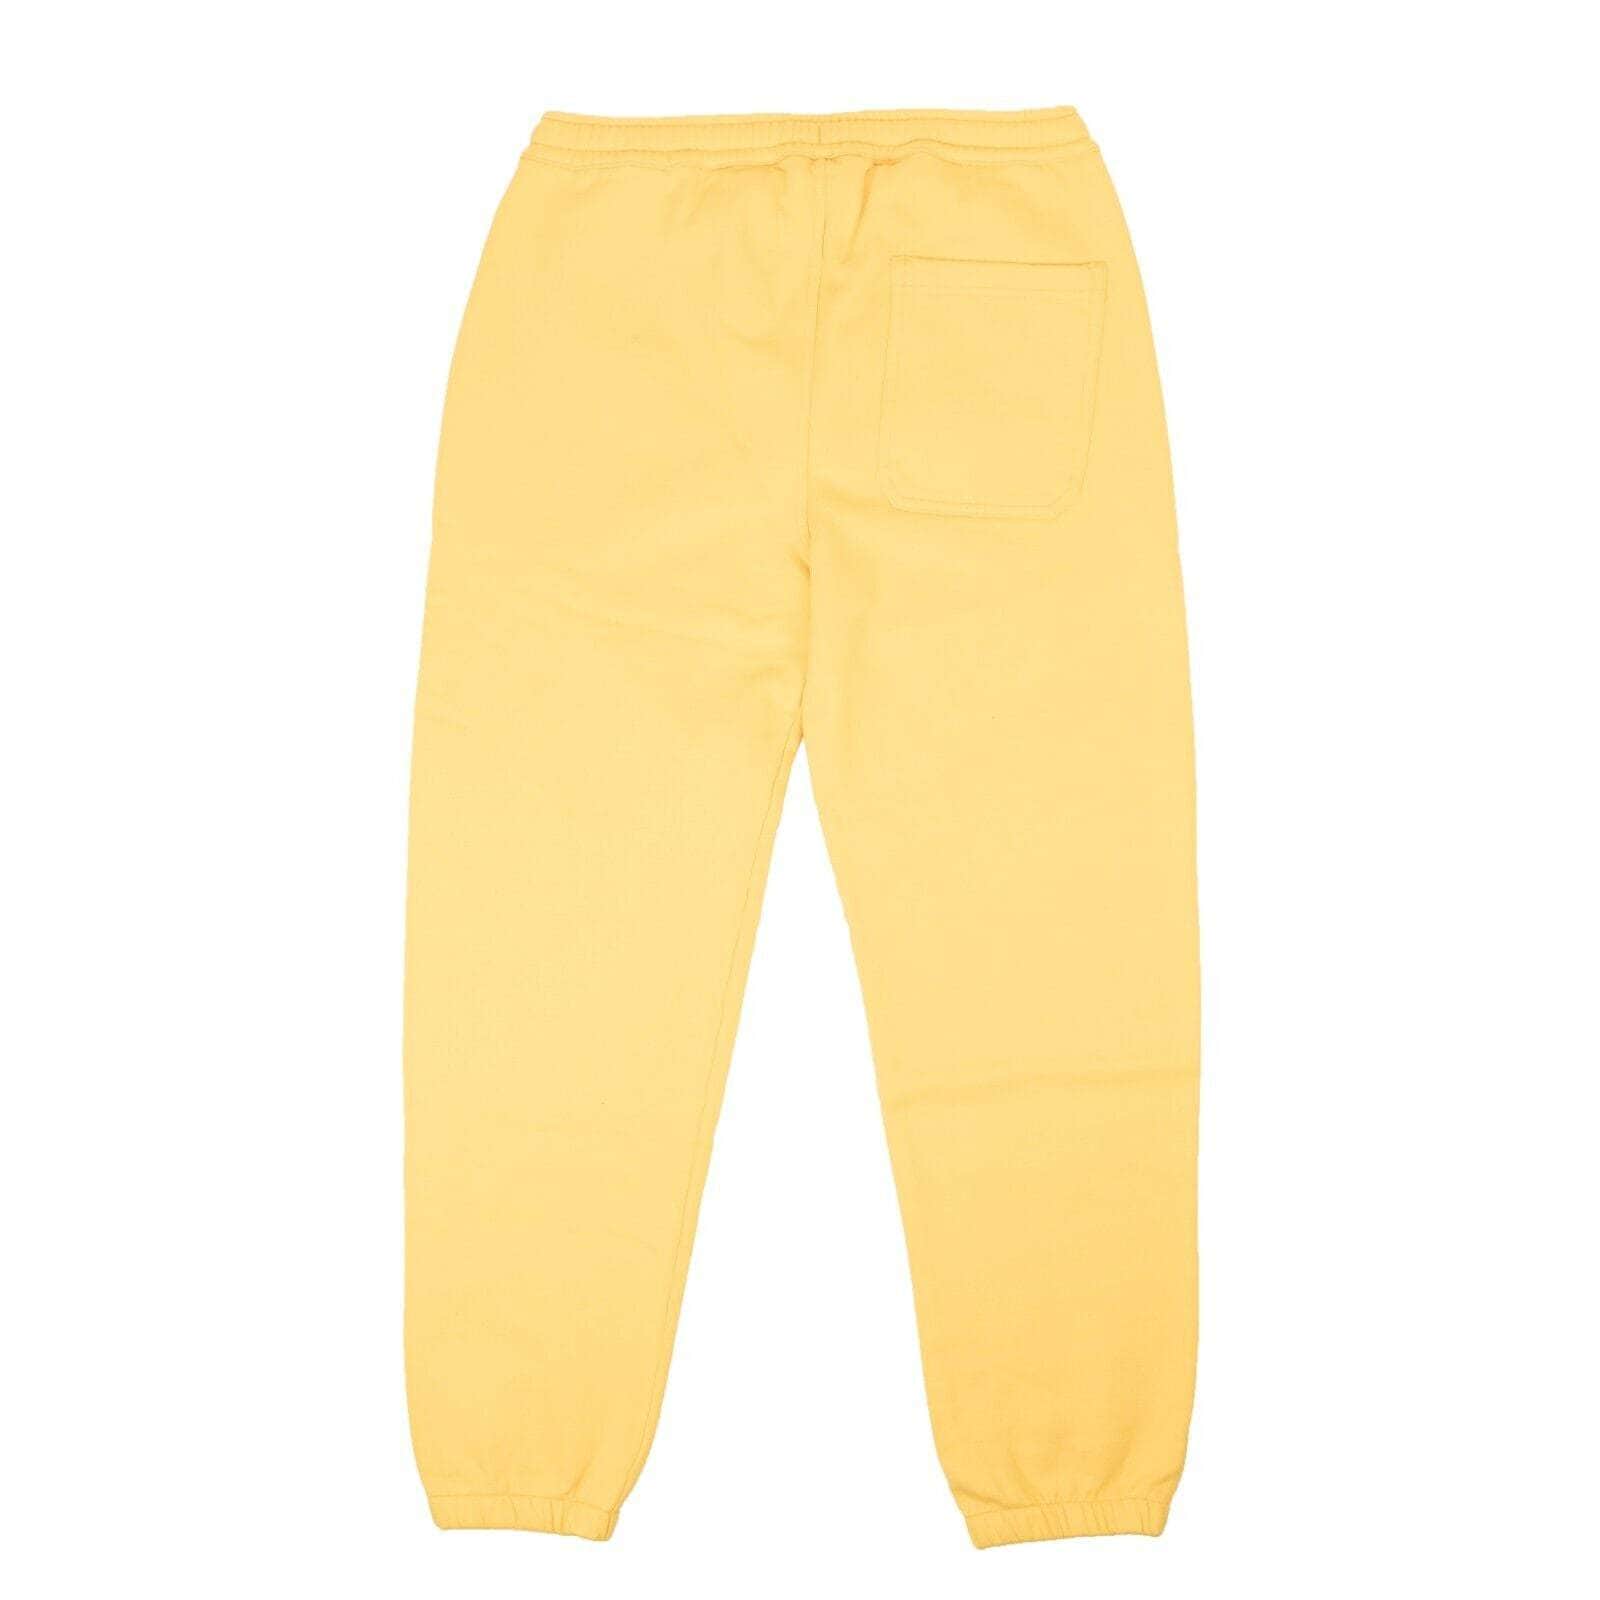 Maharishi channelenable-all, chicmi, couponcollection, gender-mens, maharishi, main-clothing, mens-joggers-sweatpants, mens-shoes, size-l, size-m, size-xl, under-250 Yellow Organic Track Sweatpants